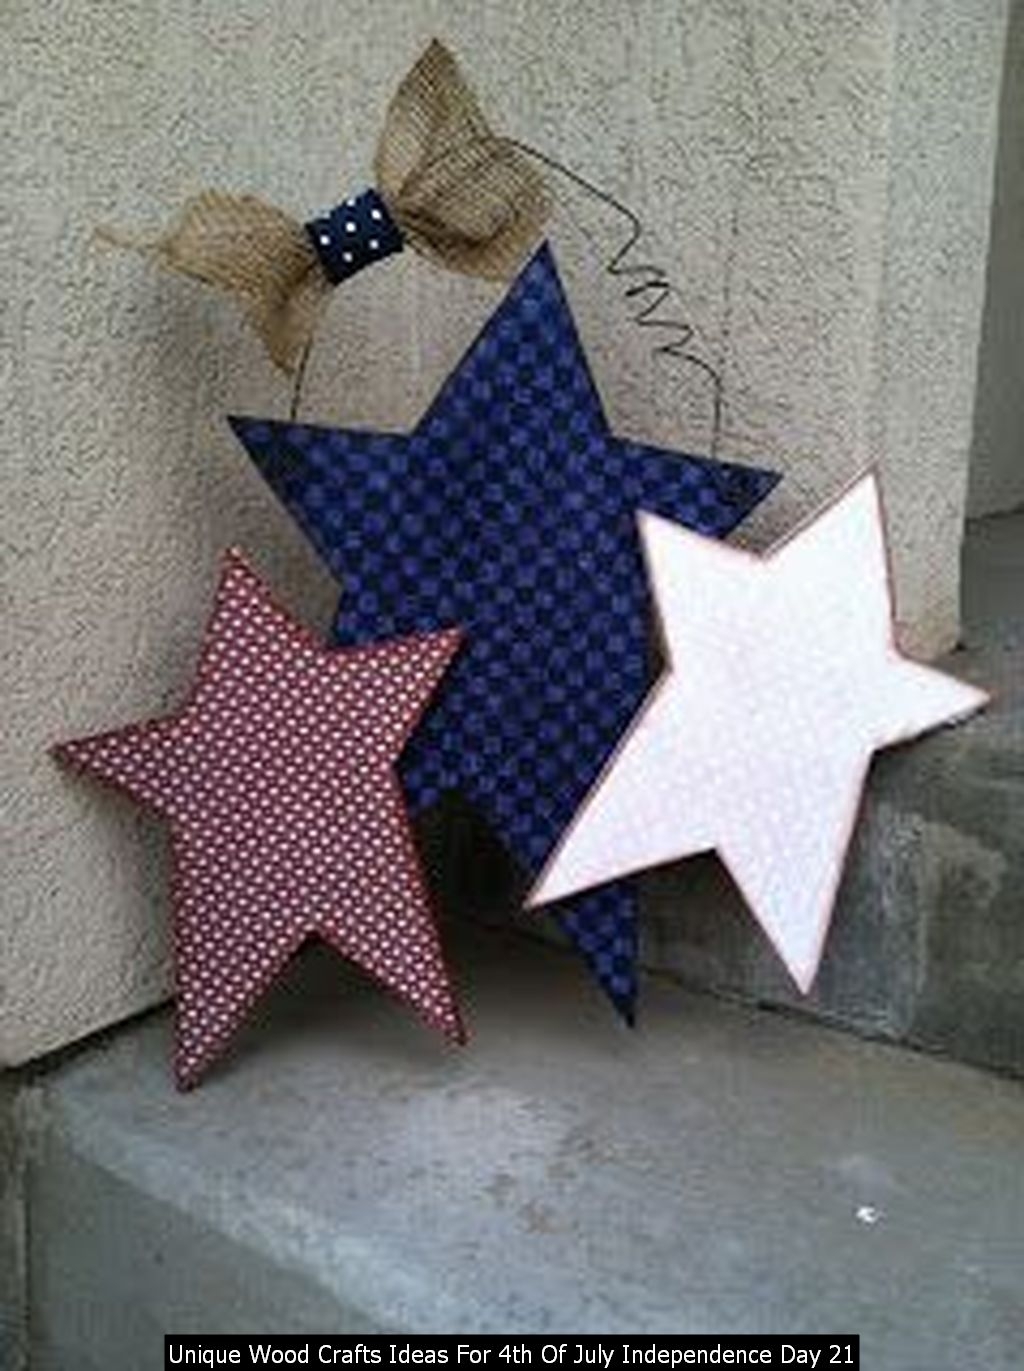 Unique Wood Crafts Ideas For 4th Of July Independence Day 21